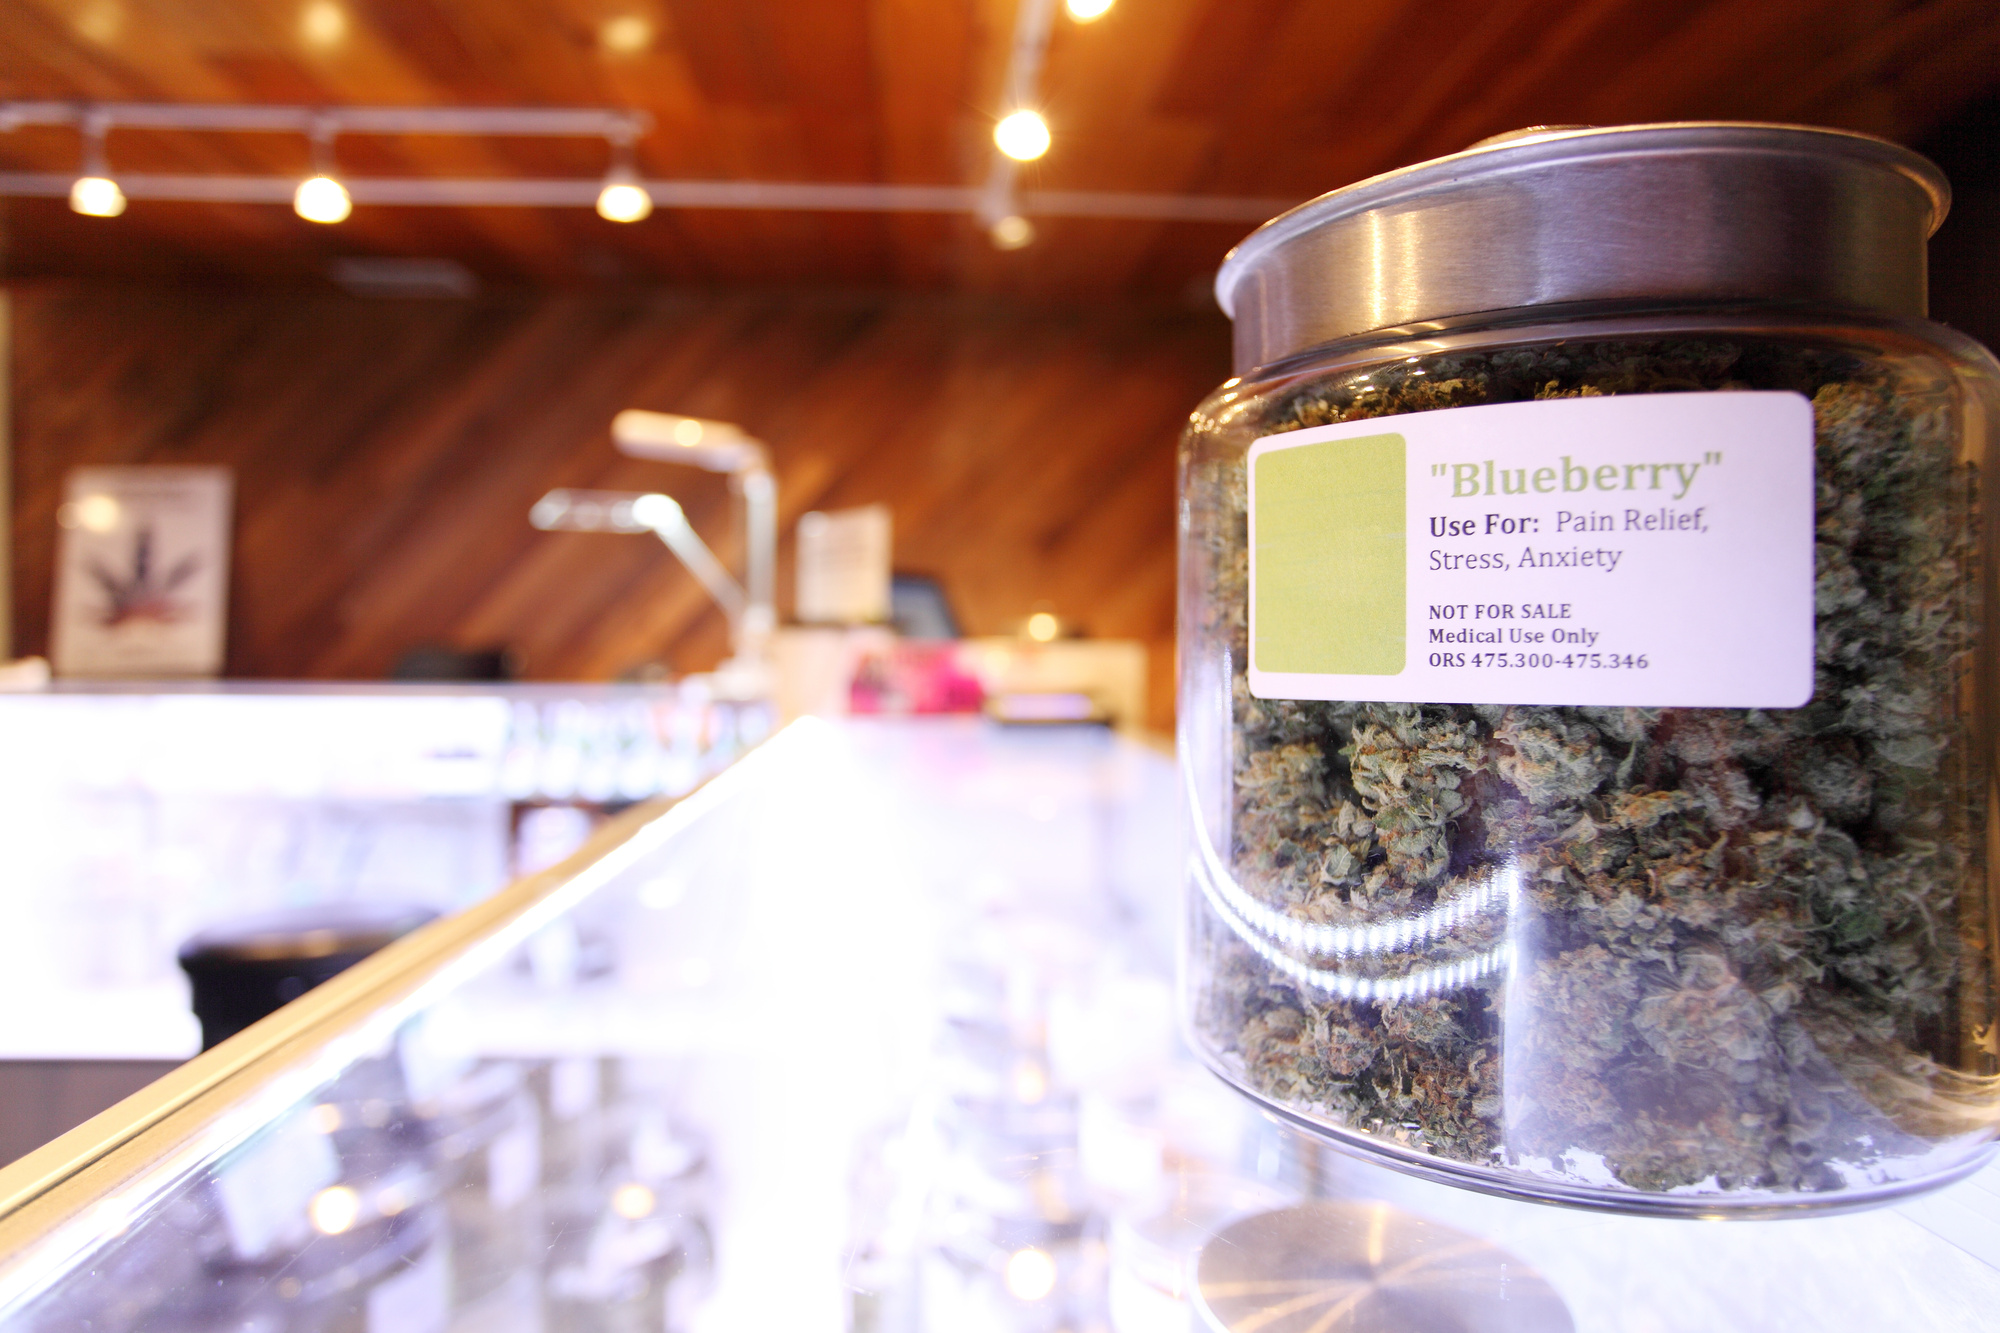 10 Things You Need to Know Before Visiting a Dispensary